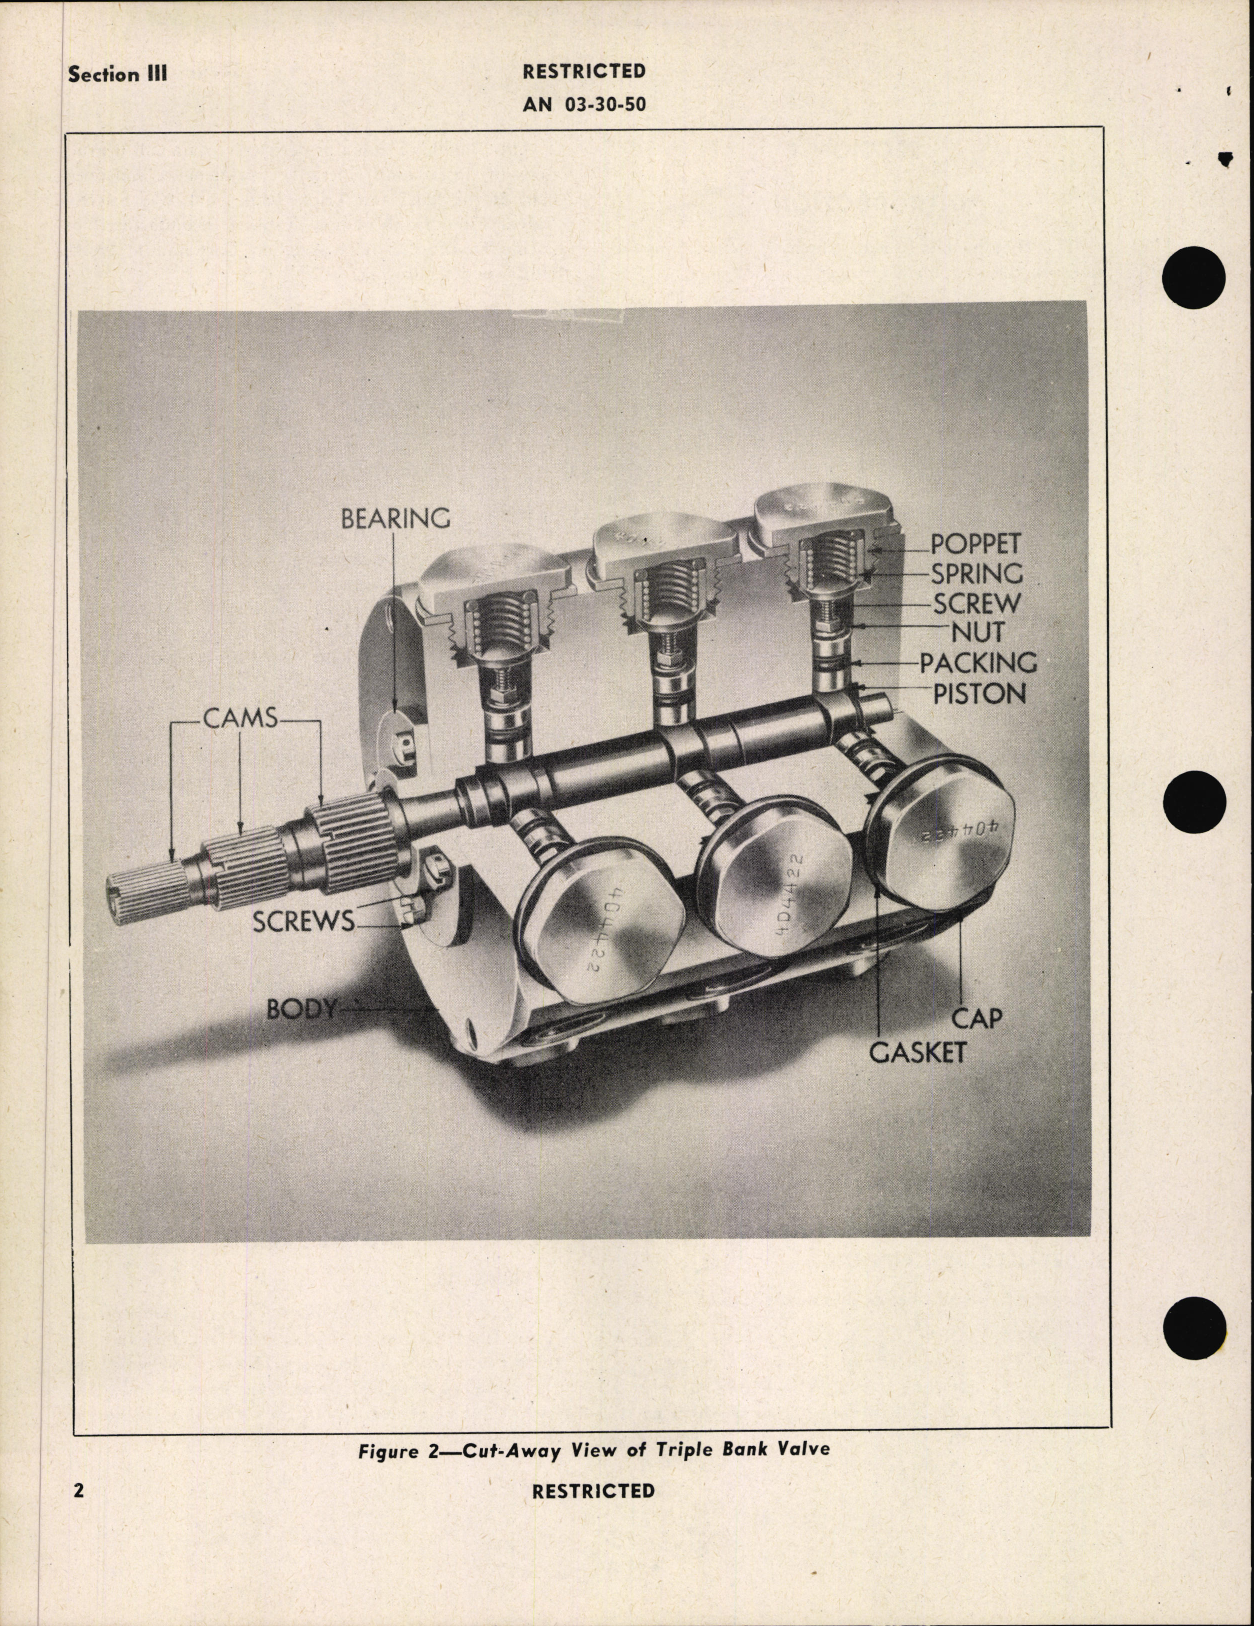 Sample page 6 from AirCorps Library document: Handbook of Instructions With Parts Catalog for Multiples Bank Four-Way Selector Valves